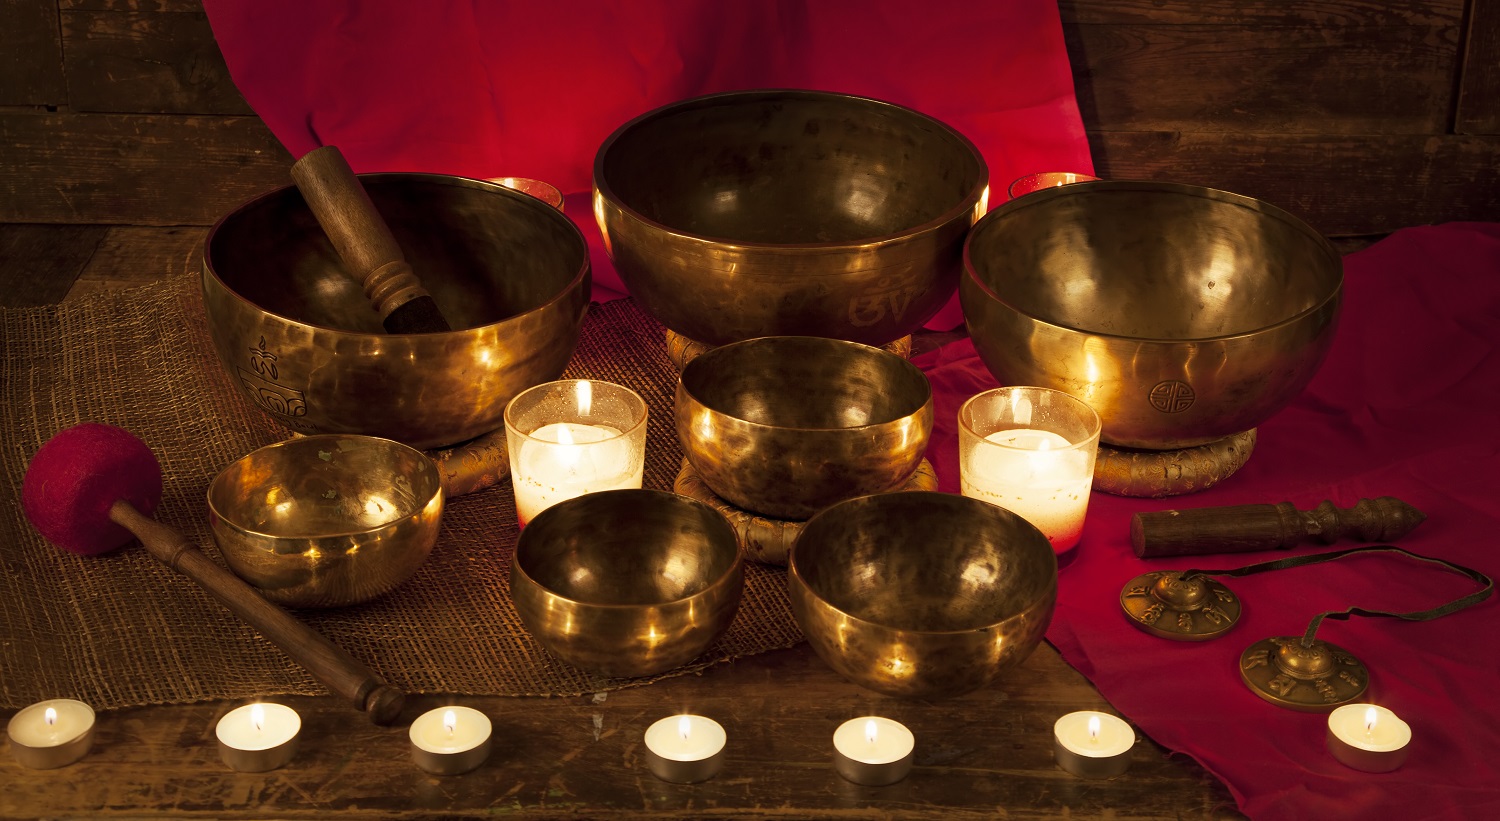 How to Get Started with Sound Baths and Sound Therapy